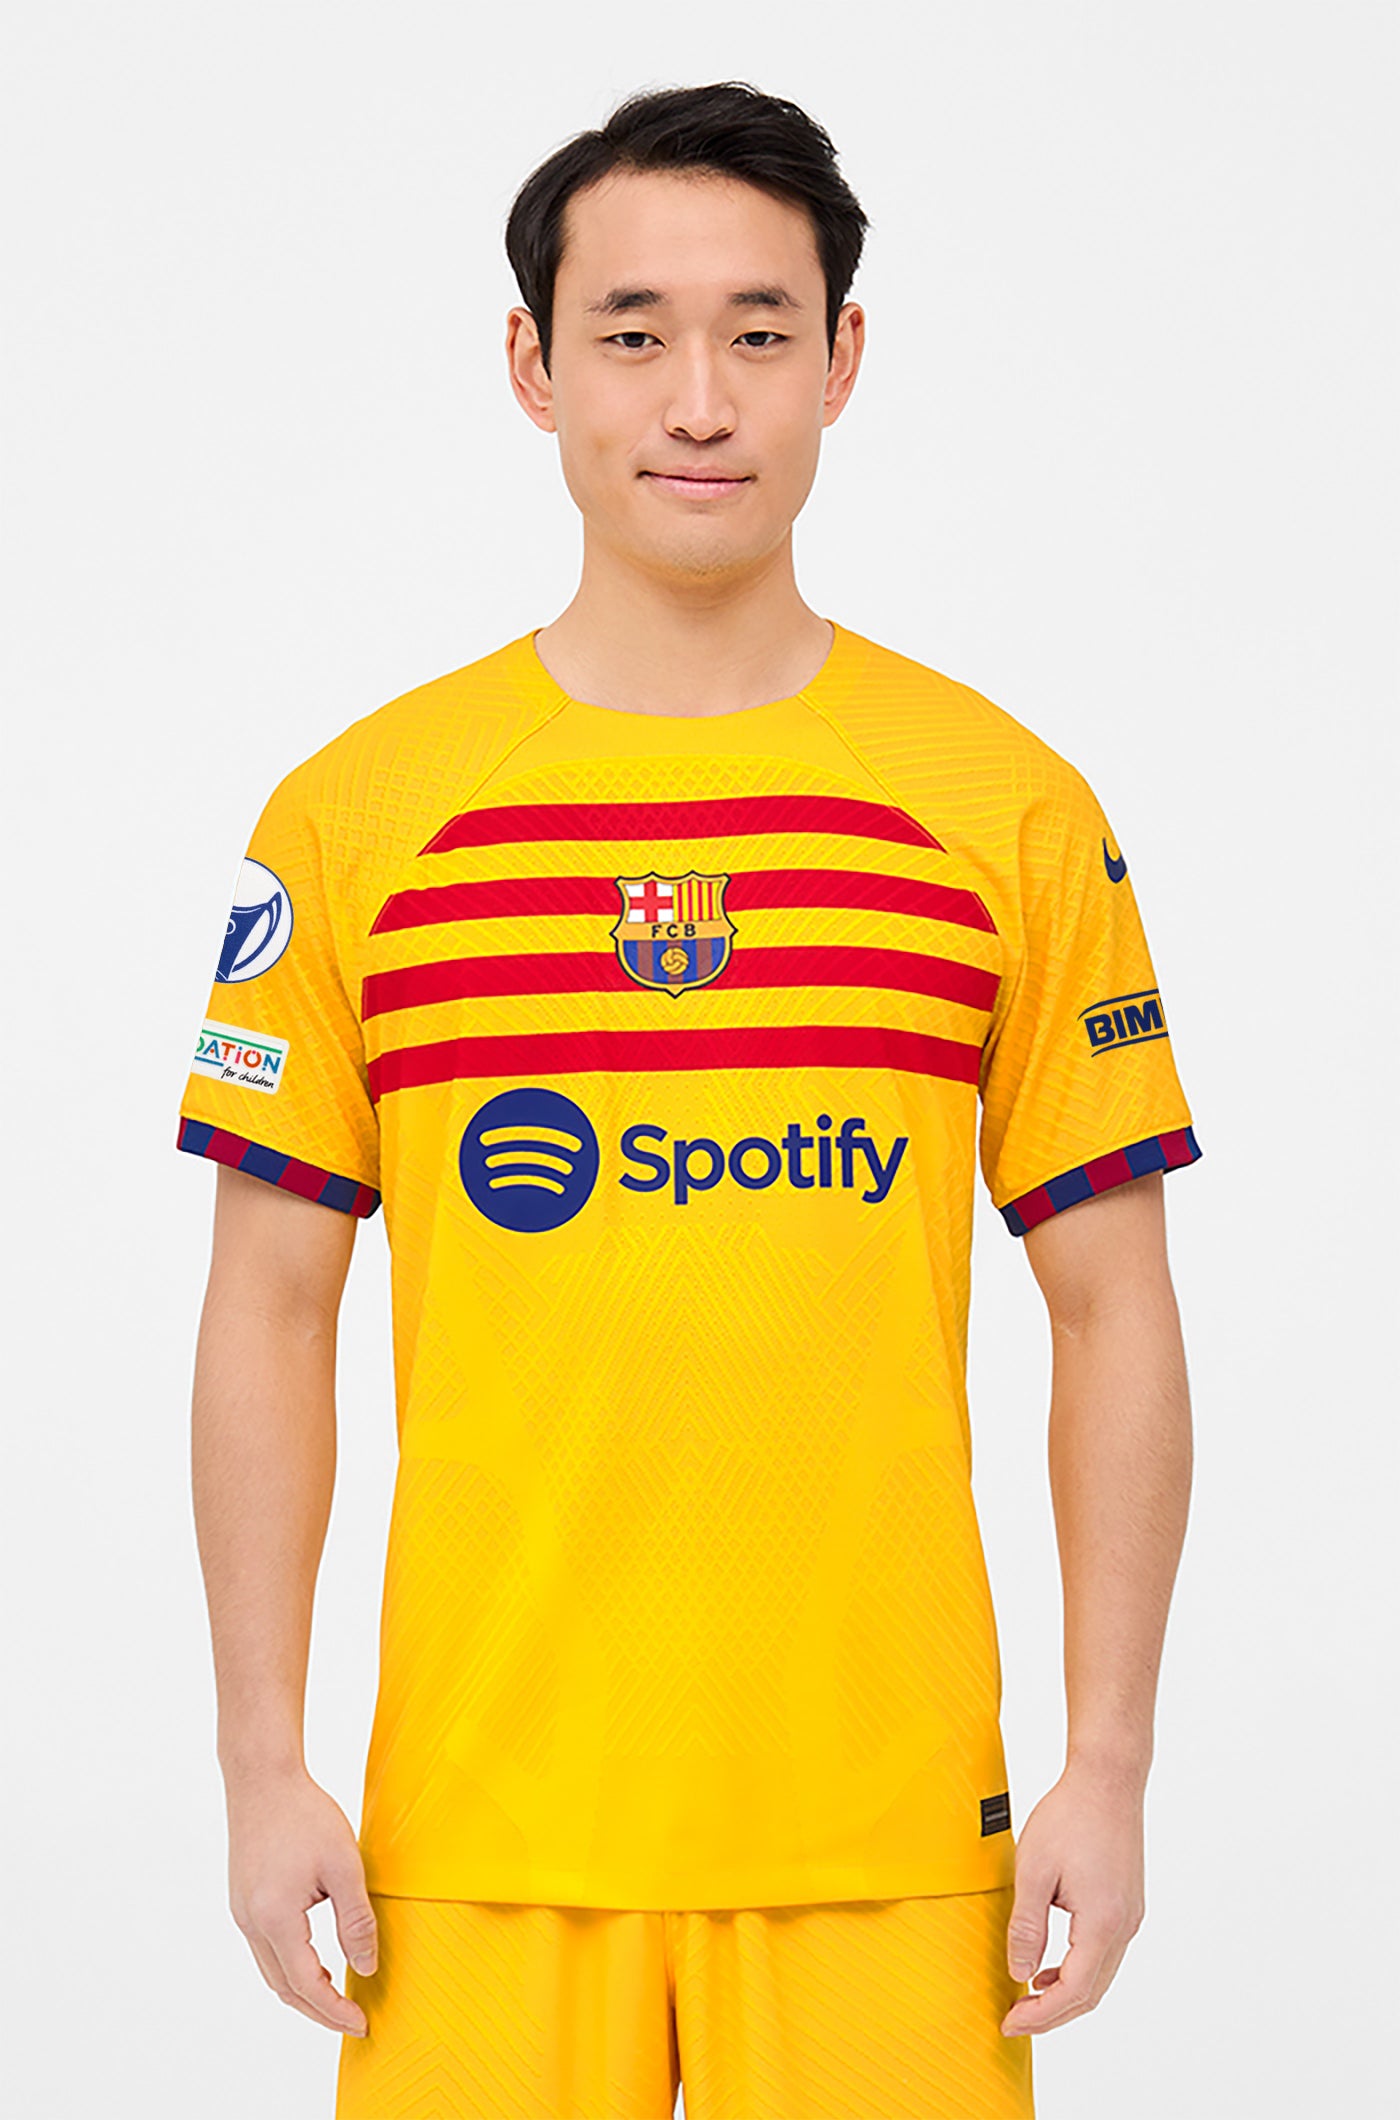 UWCL FC Barcelona fourth shirt 23/24 Player's Edition - KEIRA